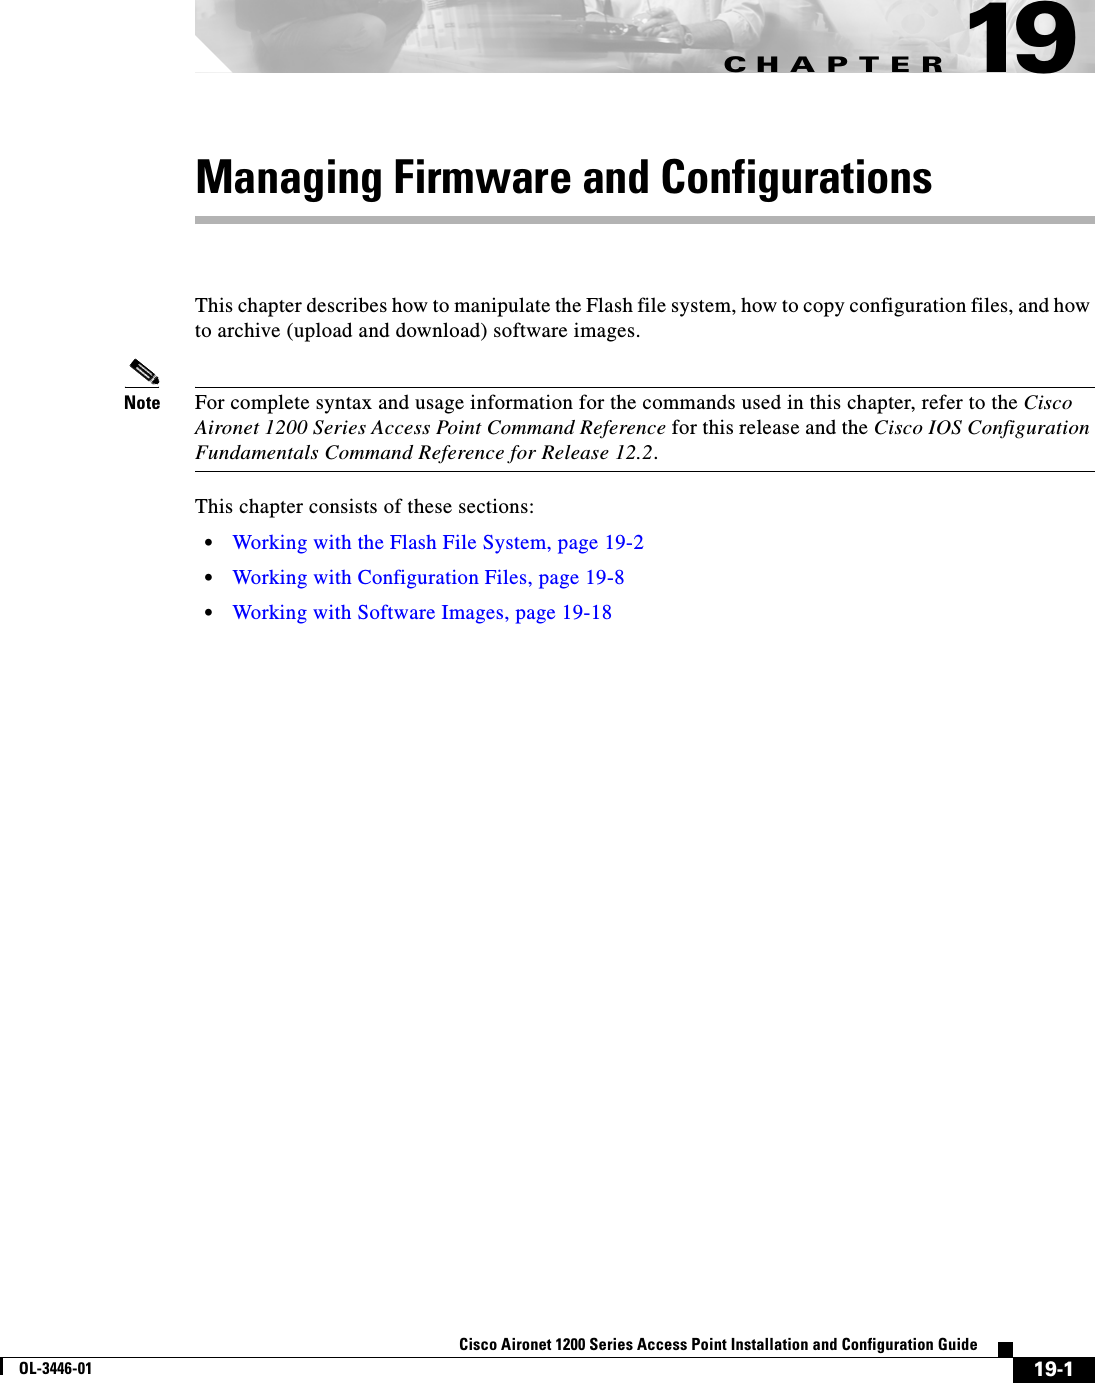 CHAPTER19-1Cisco Aironet 1200 Series Access Point Installation and Configuration GuideOL-3446-0119Managing Firmware and ConfigurationsThis chapter describes how to manipulate the Flash file system, how to copy configuration files, and how to archive (upload and download) software images. Note For complete syntax and usage information for the commands used in this chapter, refer to the Cisco Aironet 1200 Series Access Point Command Reference for this release and the Cisco IOS Configuration Fundamentals Command Reference for Release 12.2.This chapter consists of these sections:•Working with the Flash File System, page 19-2•Working with Configuration Files, page 19-8•Working with Software Images, page 19-18